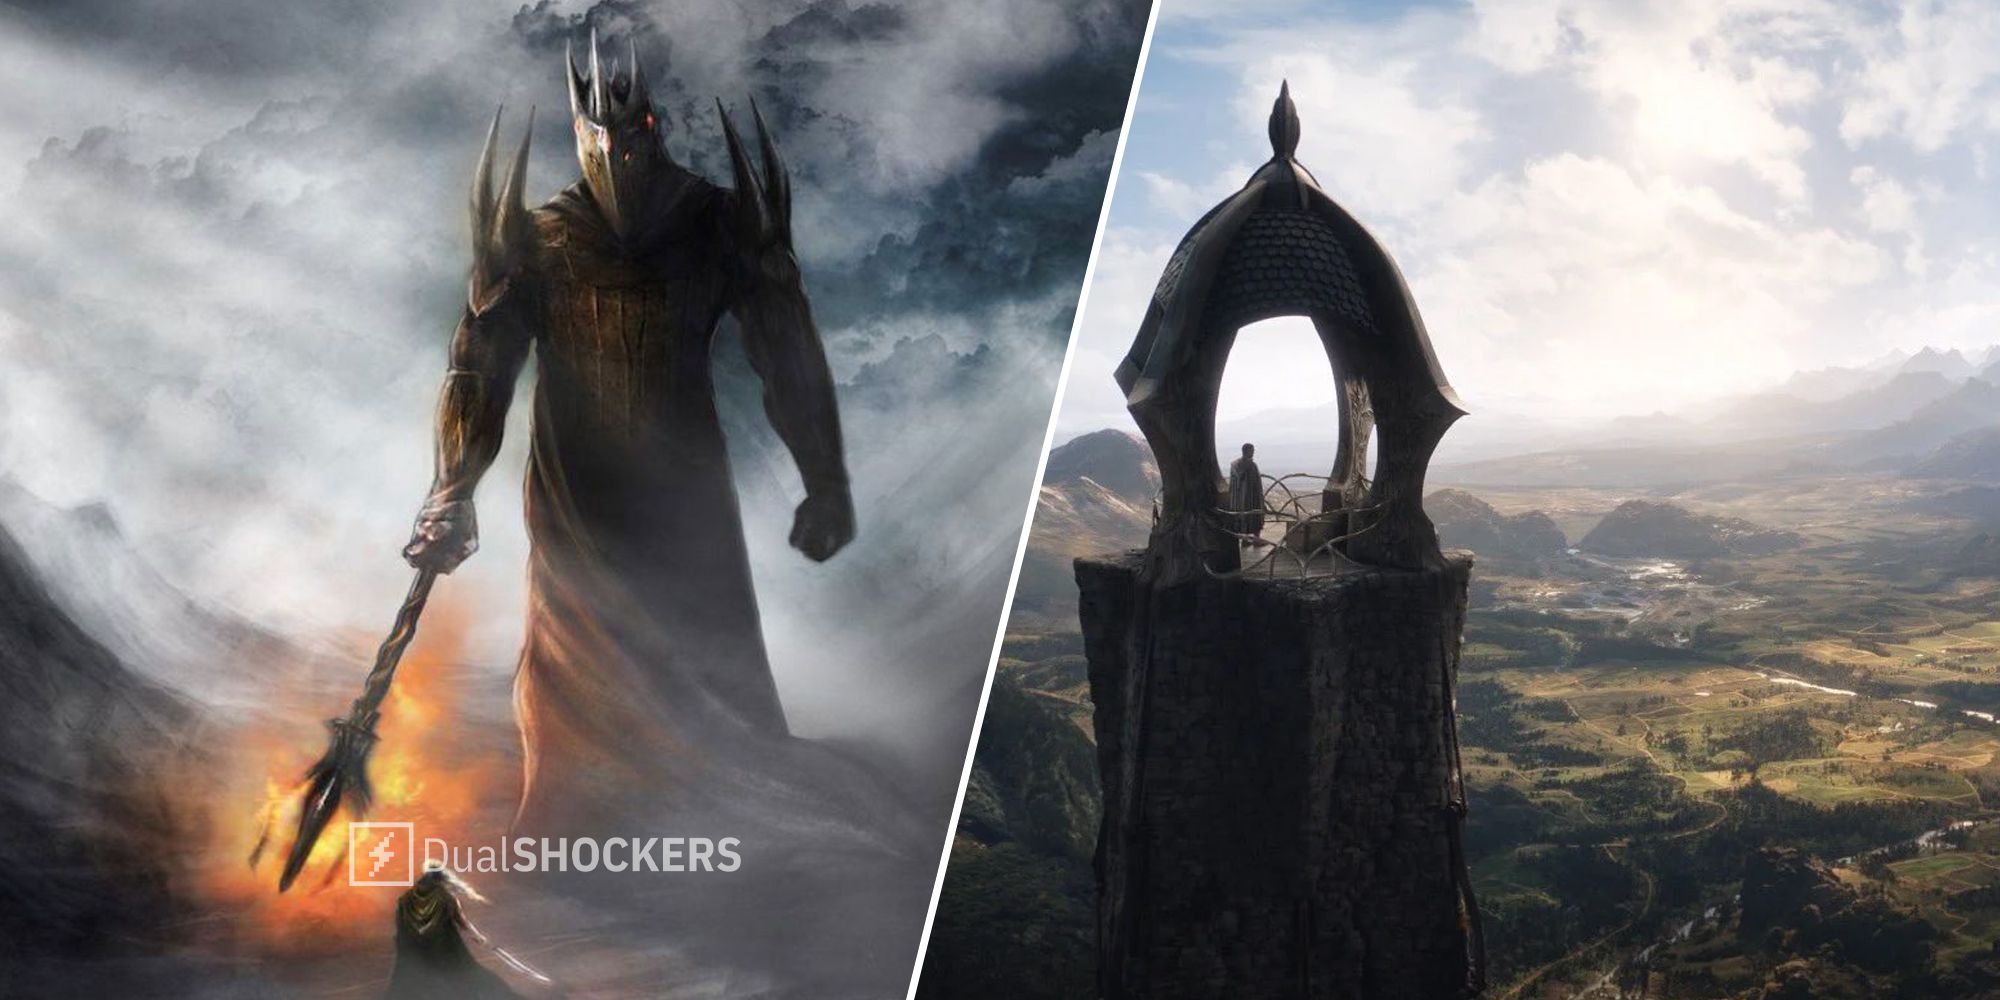 Sauron vs. Morgoth: Who is Lord of the Rings' strongest dark lord? The Lord  of the Rings had two evil Dark Lords: Morgoth and Sauron. Which one was  more powerful? Which would